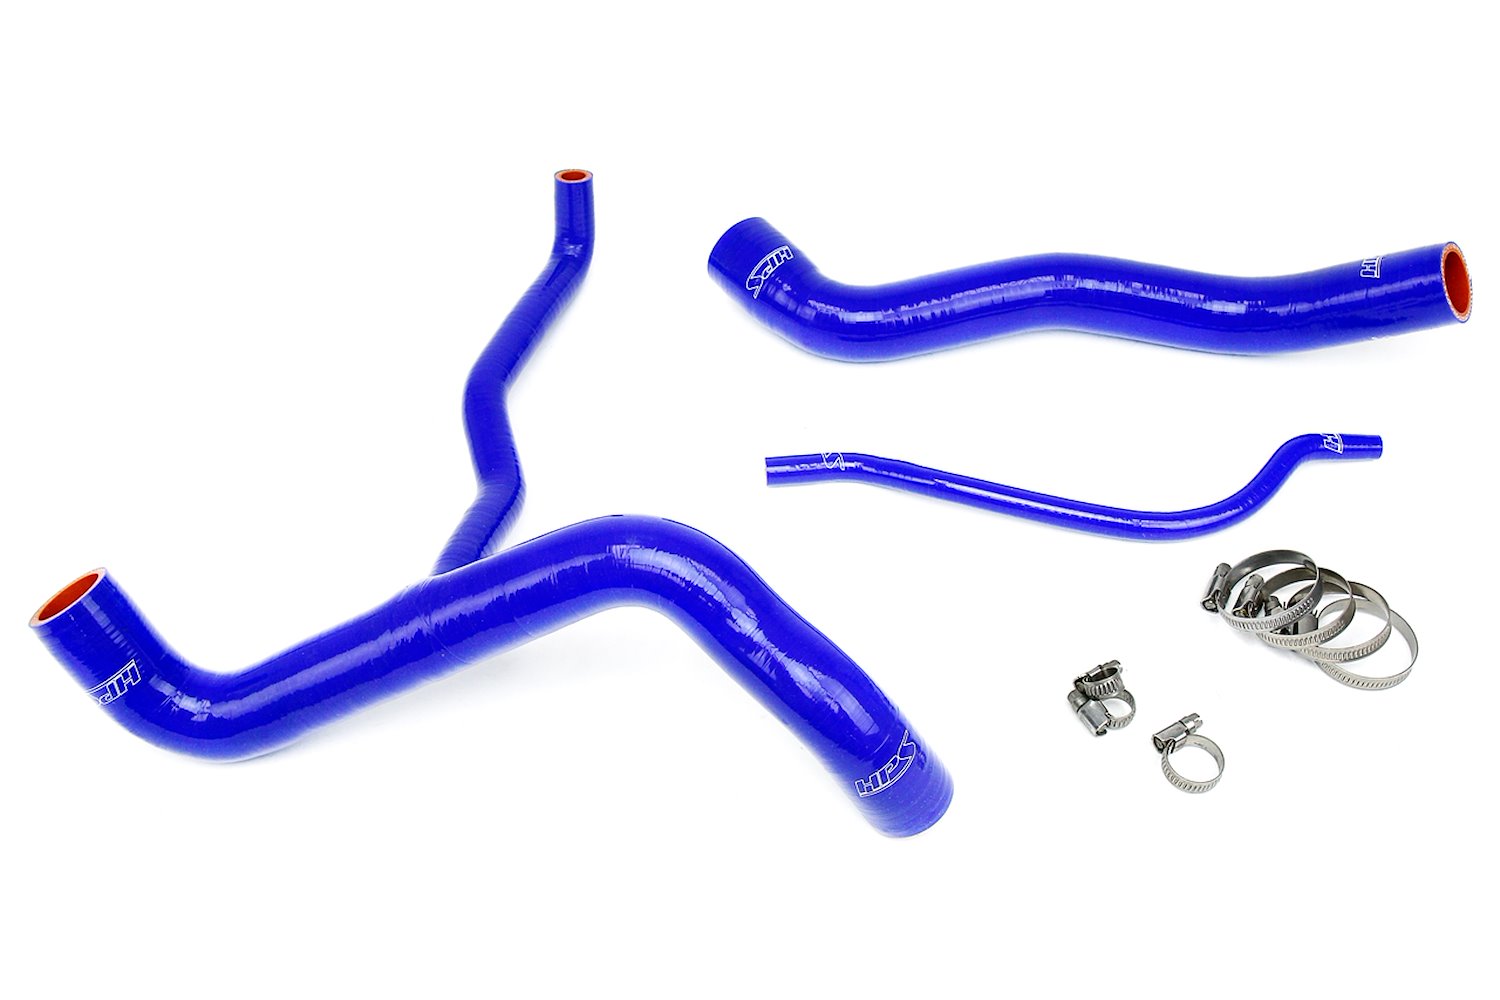 57-1304-BLUE Radiator Hose Kit, High-Temp 3-Ply Reinforced Silicone, Replace OEM Rubber Radiator Coolant Hoses